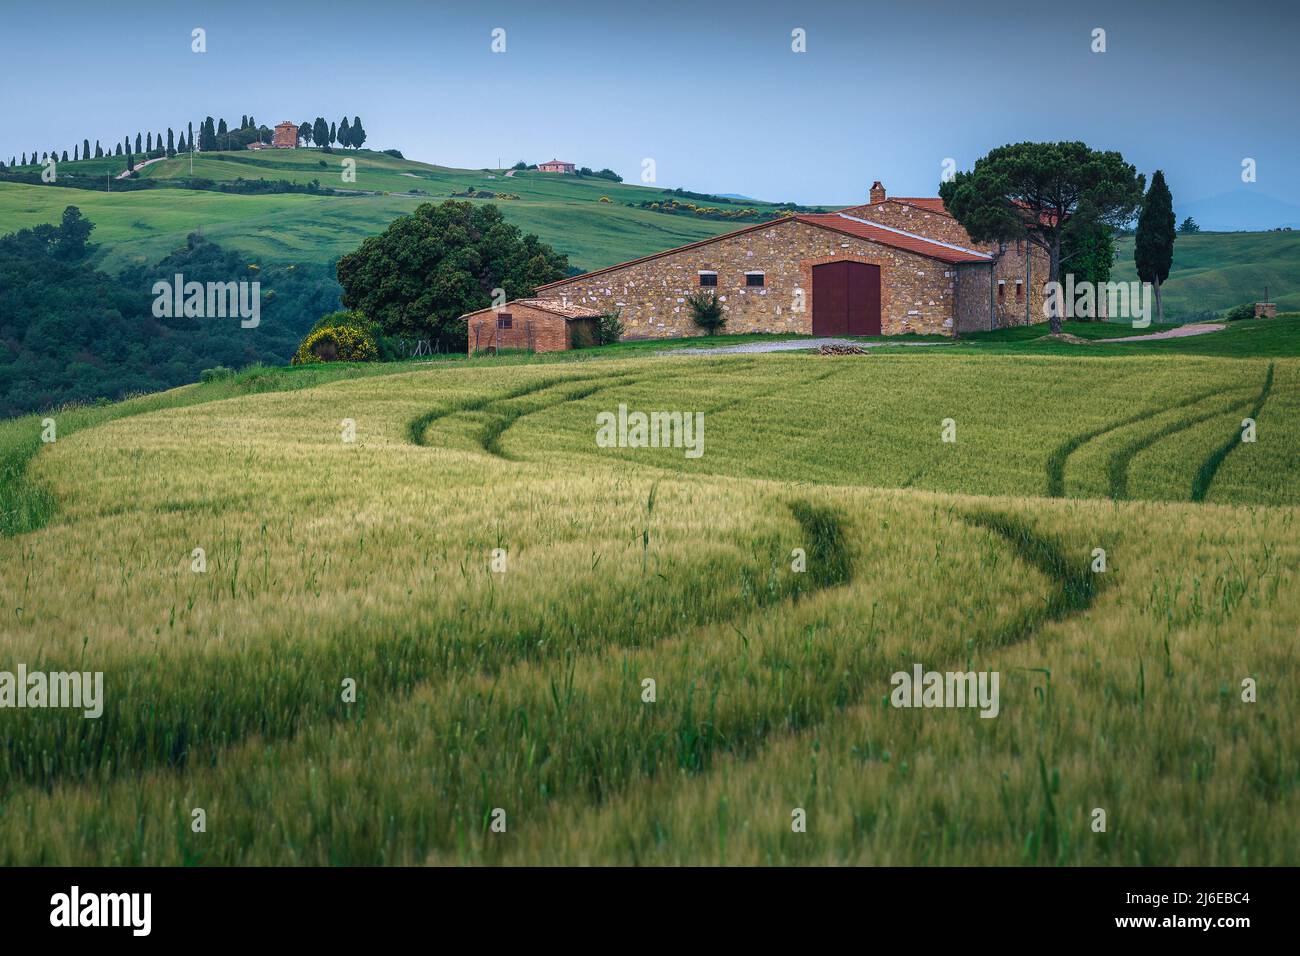 Stunning countryside scenery with green grain fields and rustic rural building in background, Tuscany, Italy, Europe Stock Photo